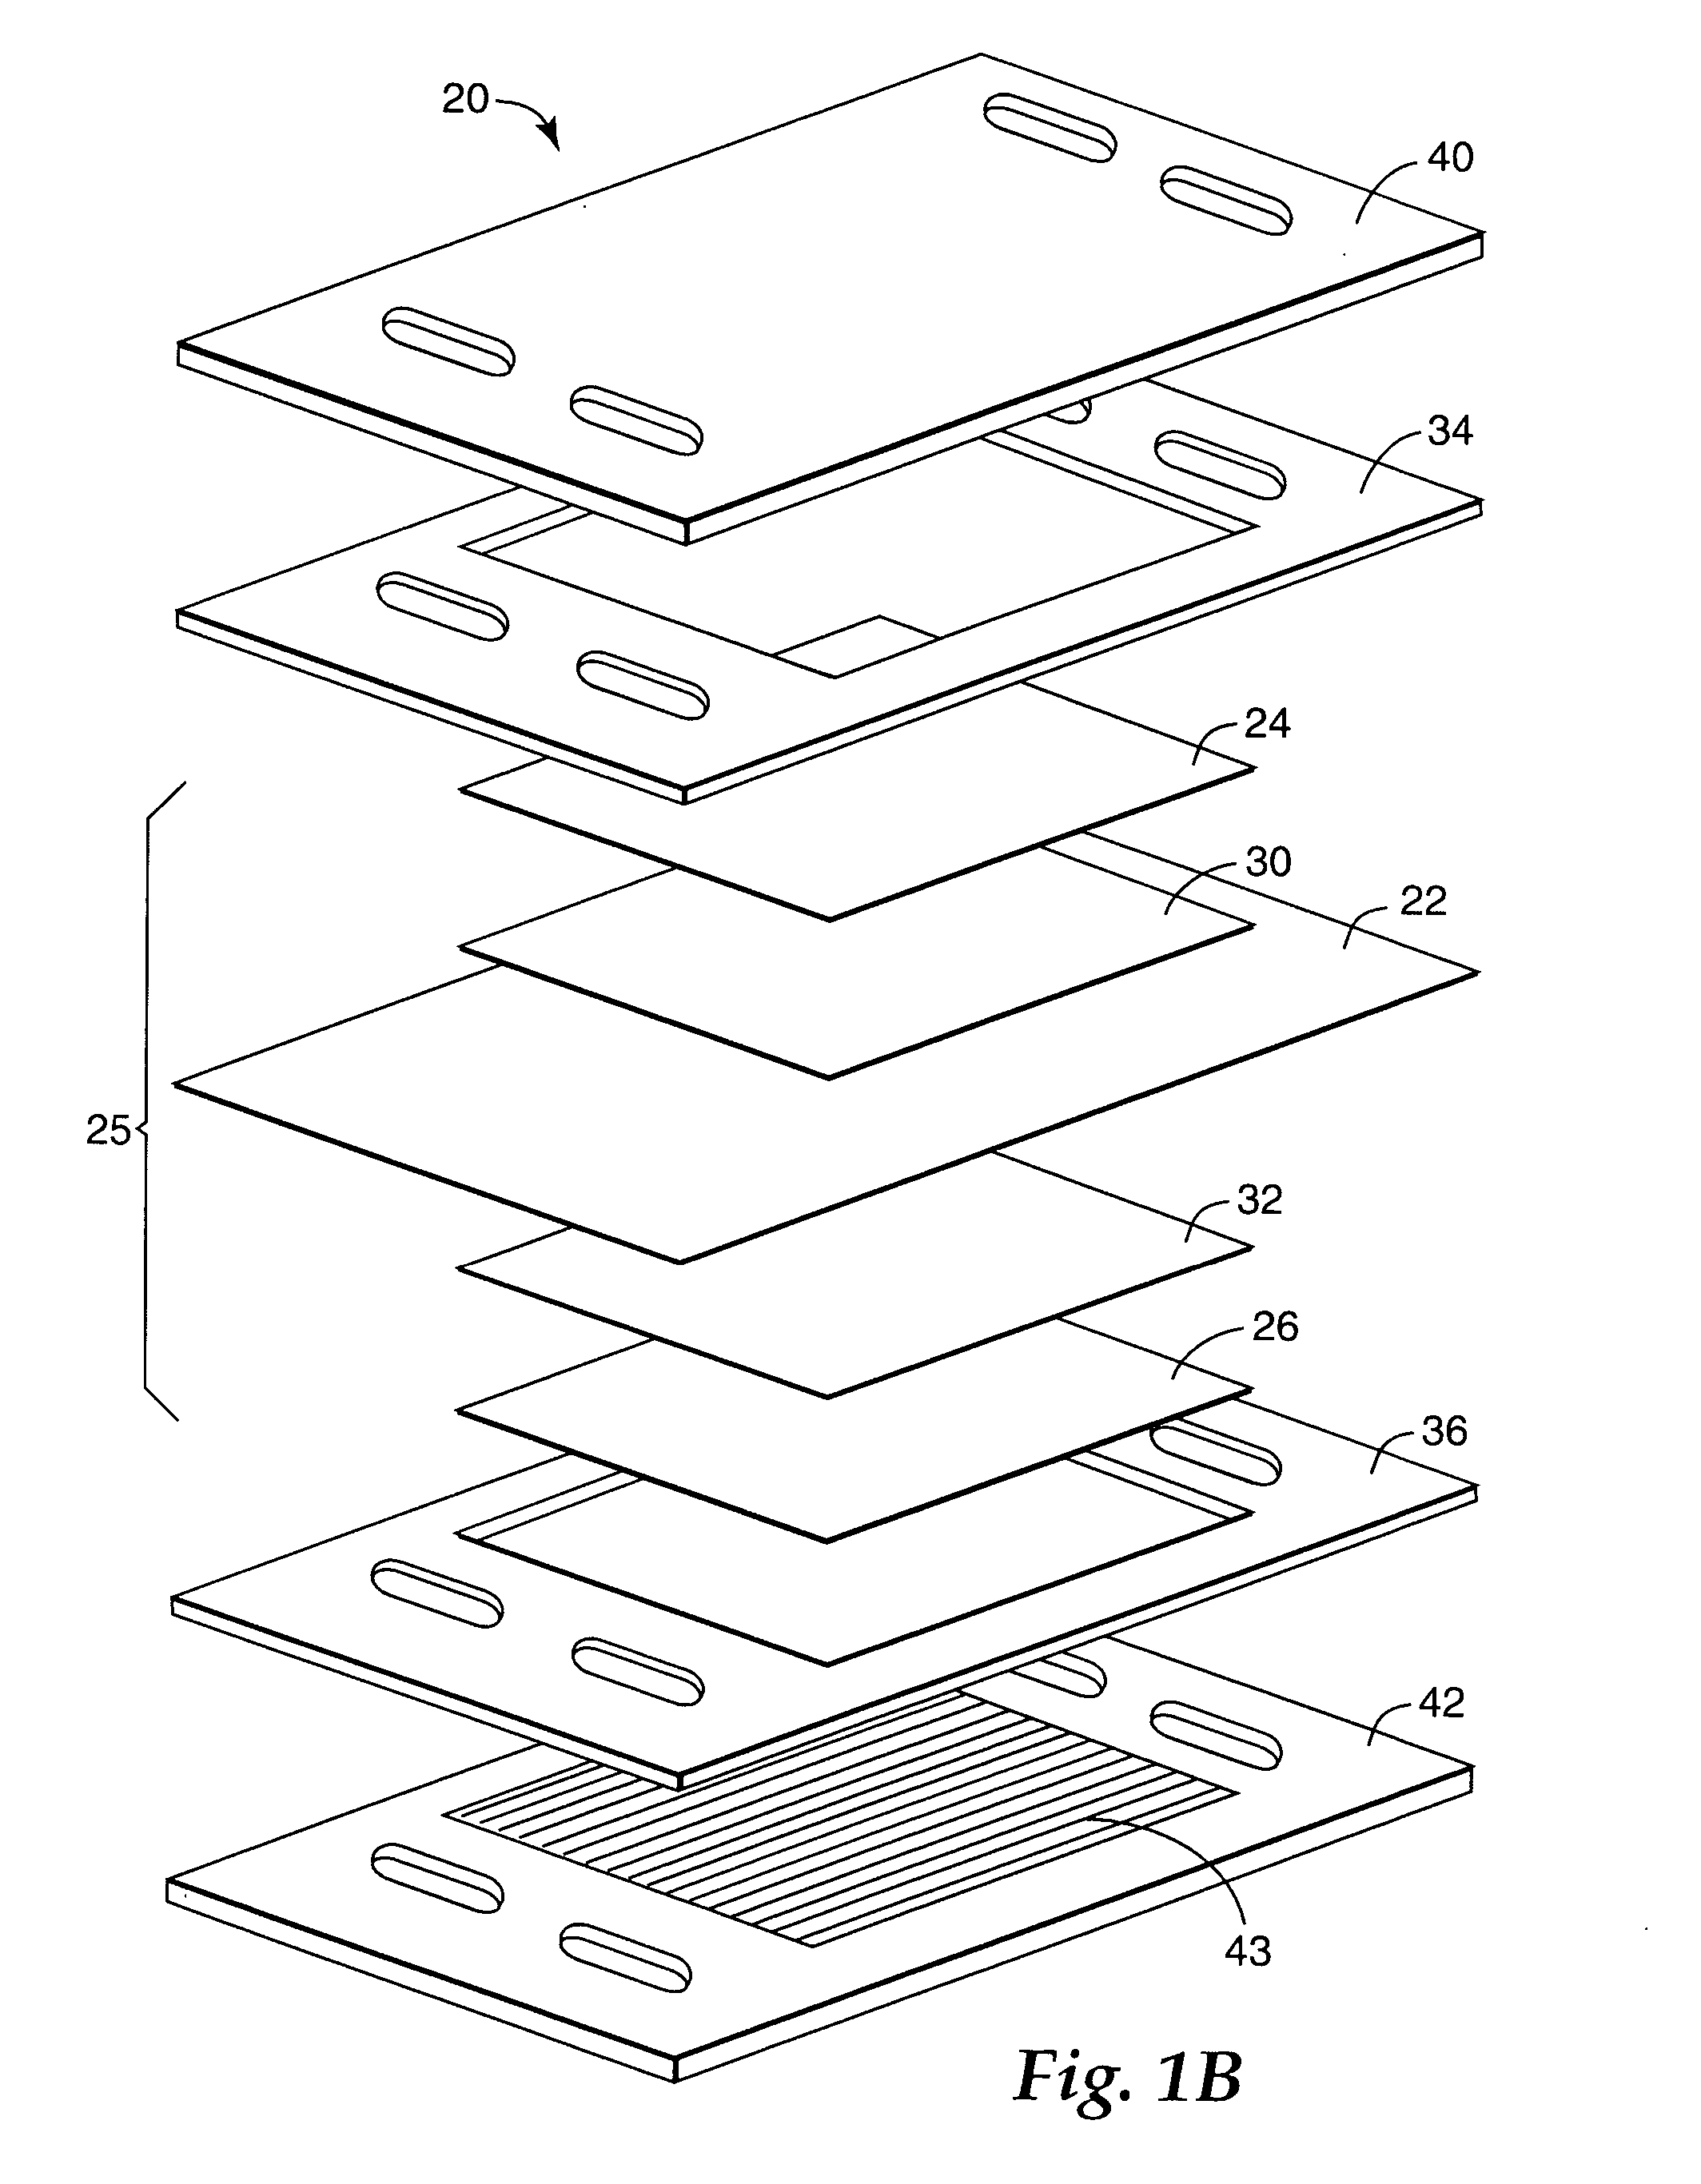 Curable subgasket for a membrane electrode assembly